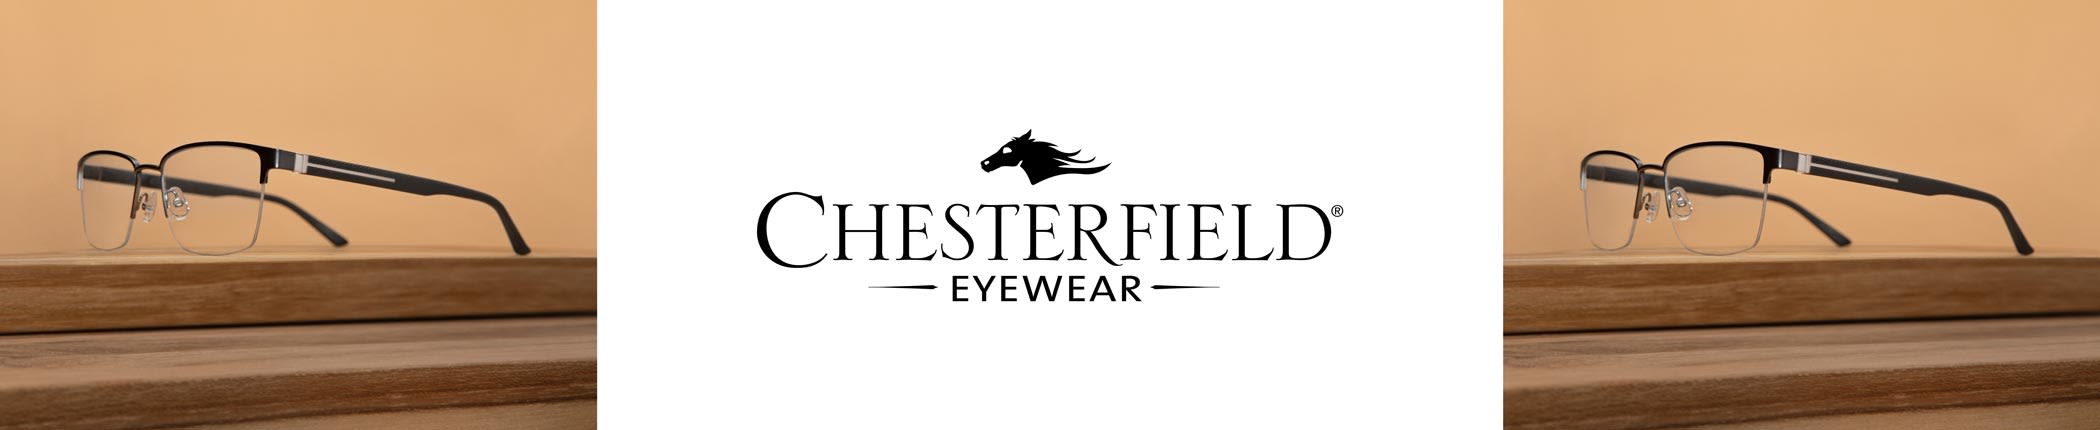 Shop Chesterfield Eyeglasses - featuring CH 87XL